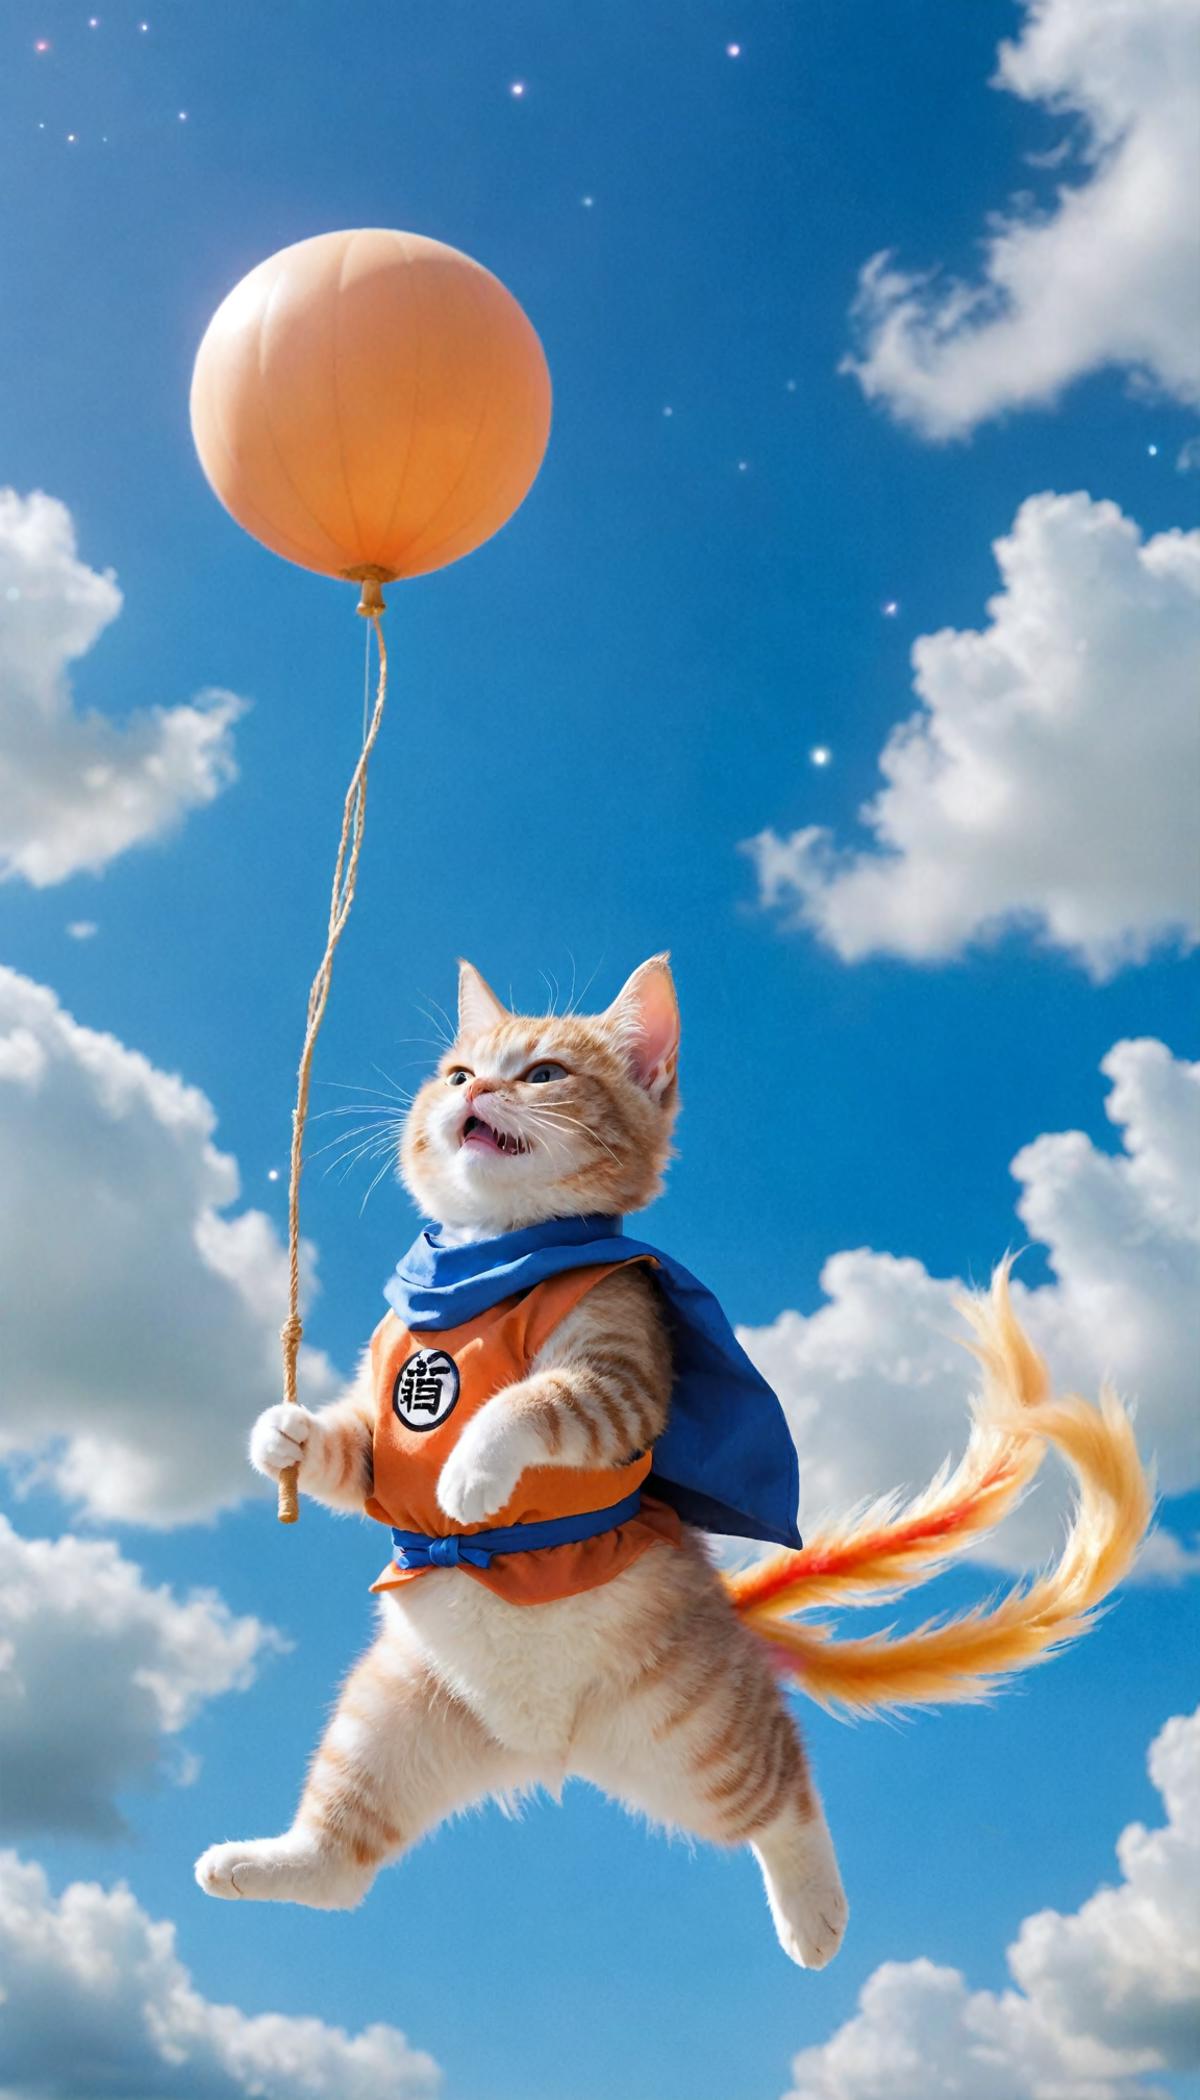 A small cat wearing a cape and holding a string to a balloon.